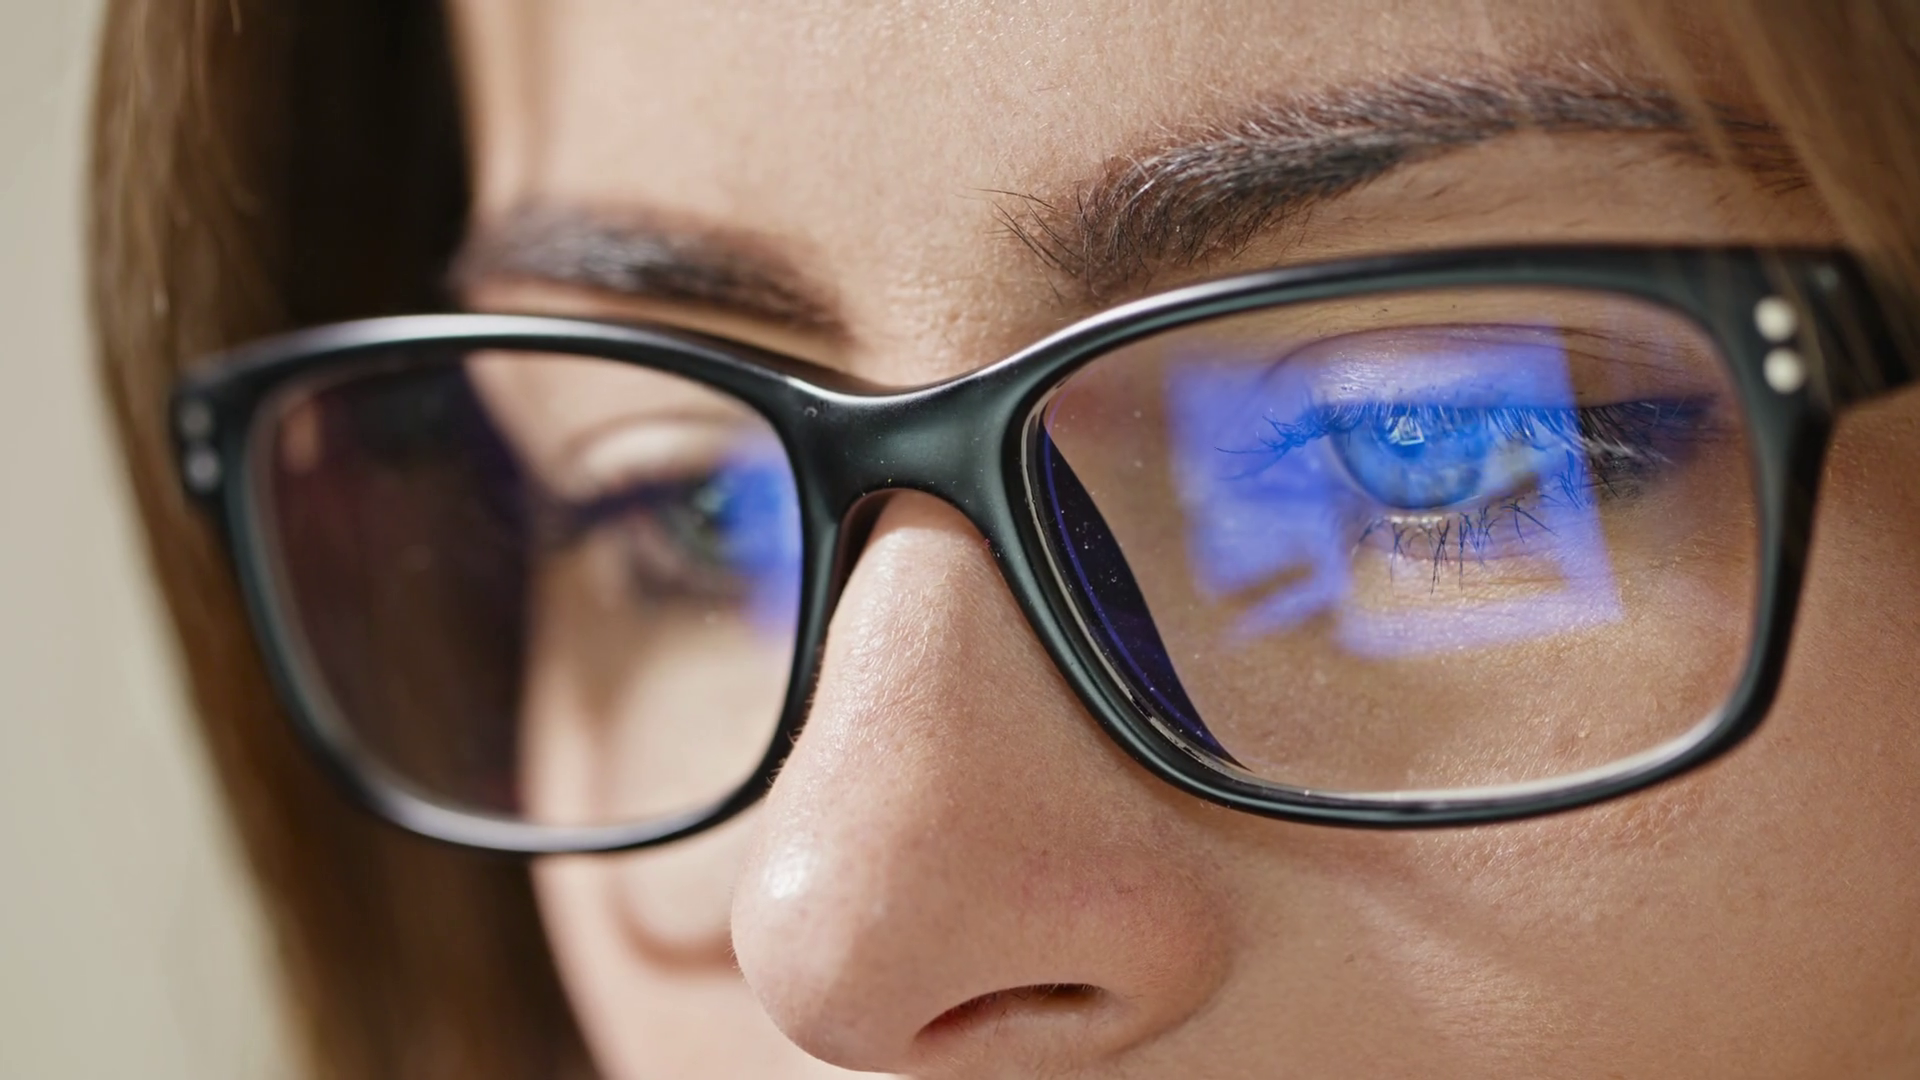 close-up-shot-of-woman-eyes-in-glasses-reflecting-a-working-computer-blue-screen_hoghlcawdx_thumbnail-full01